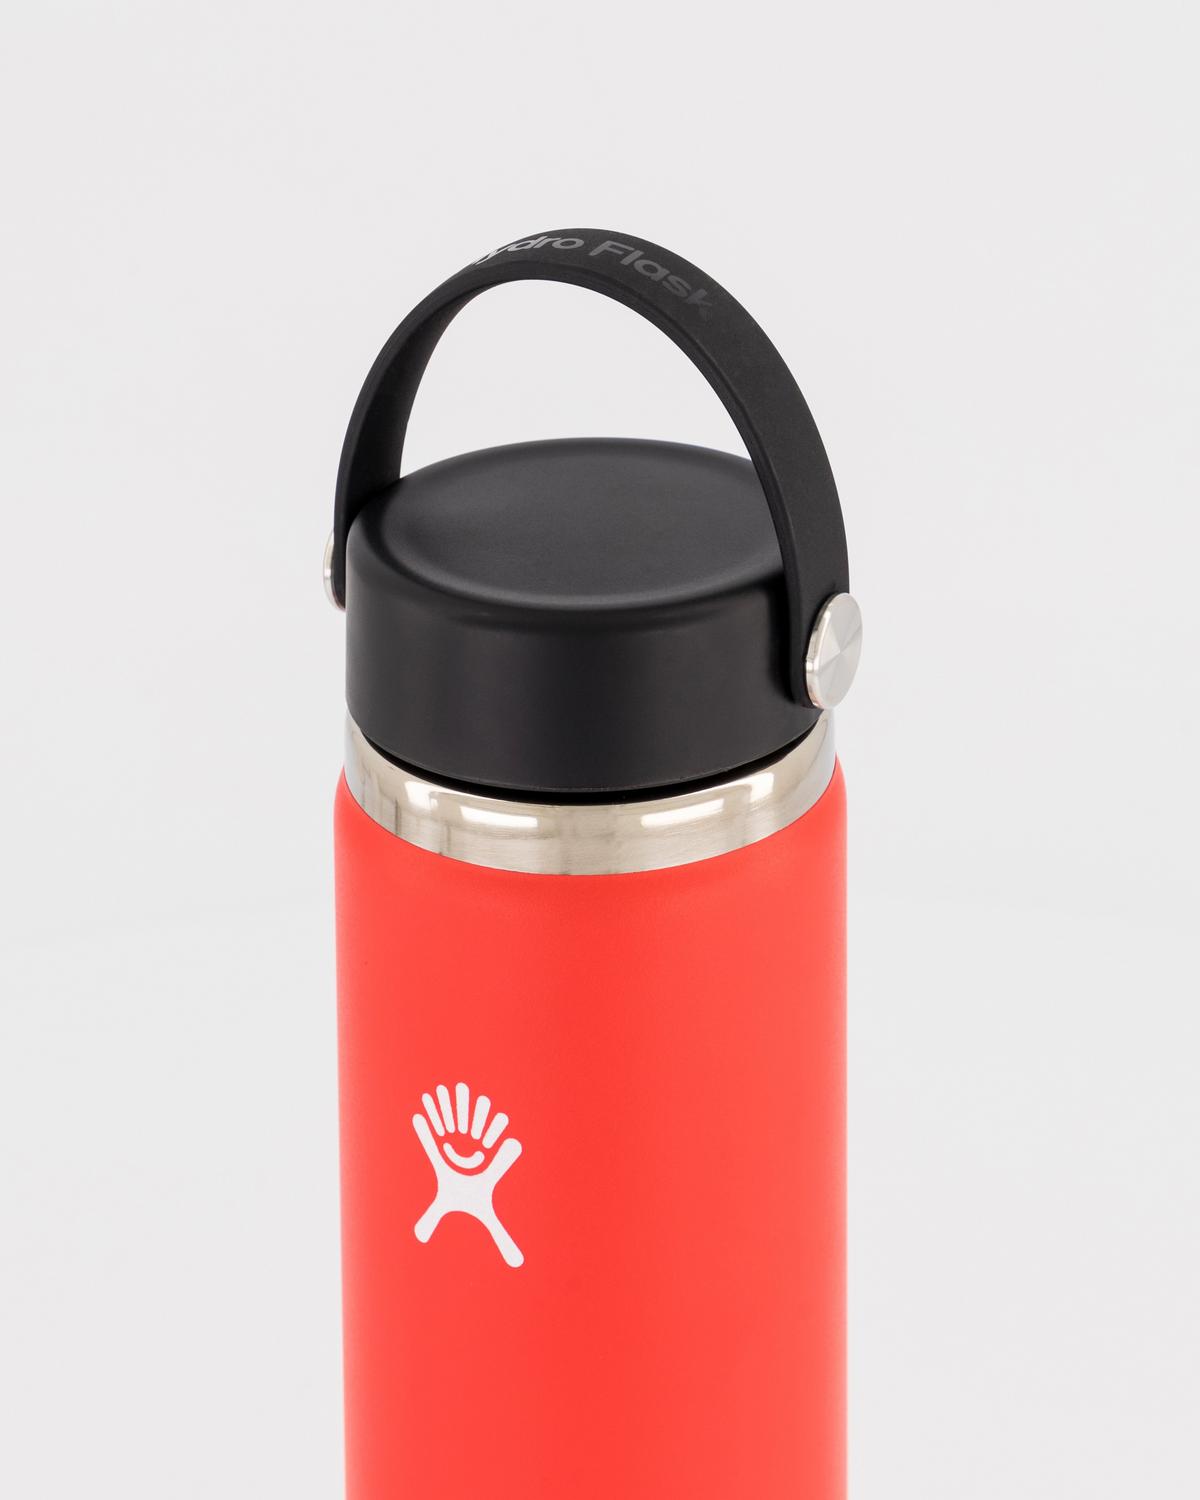 Hydro Flask 591ml Wide Mouth Flask -  Red